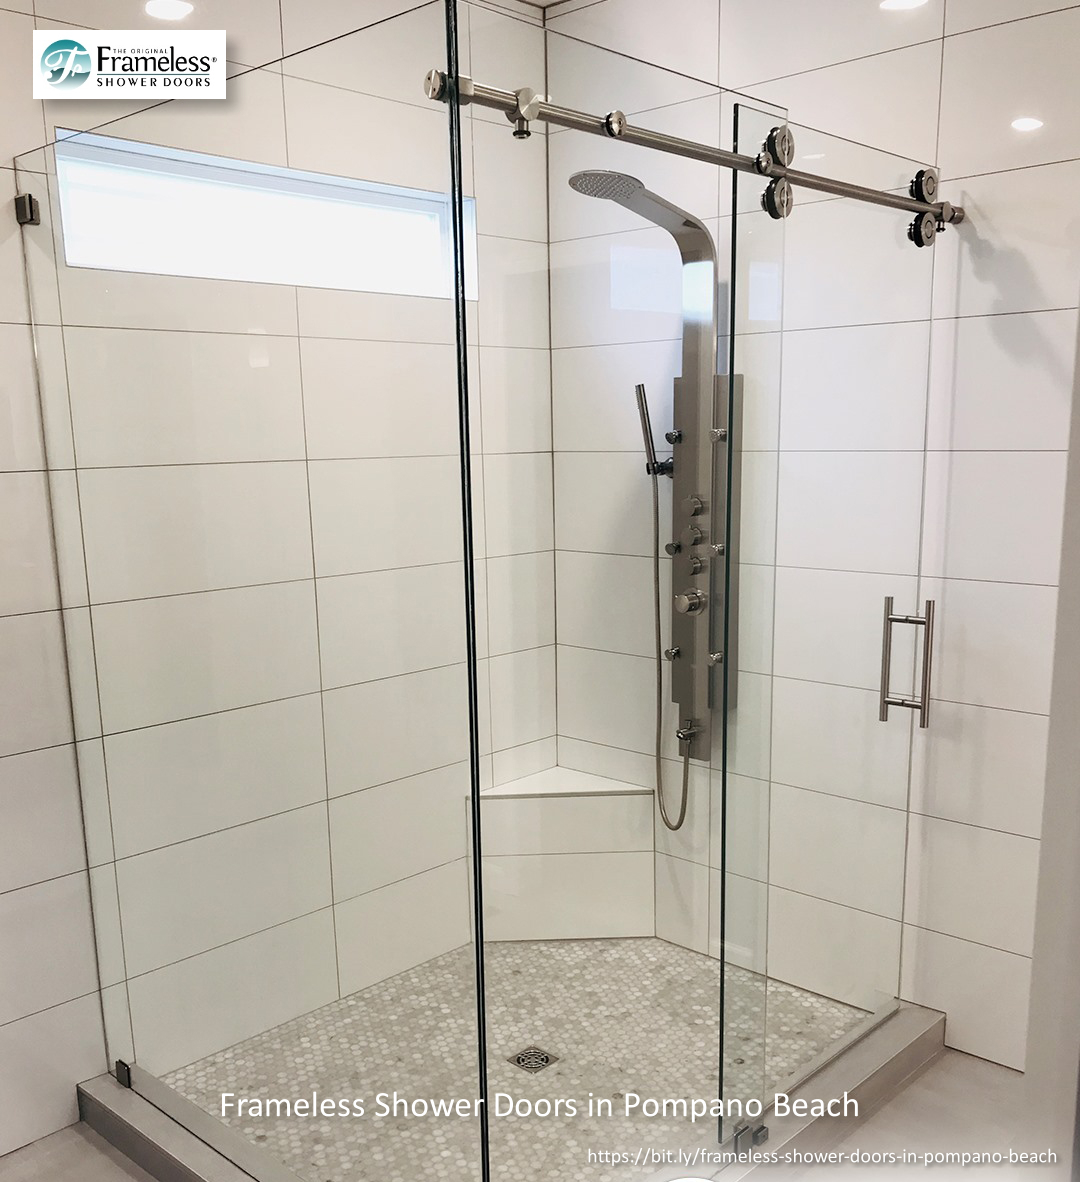 , Frameless Shower Doors in Pompano Beach, Florida: Everything You Wanted to Know and More, Frameless Shower Doors